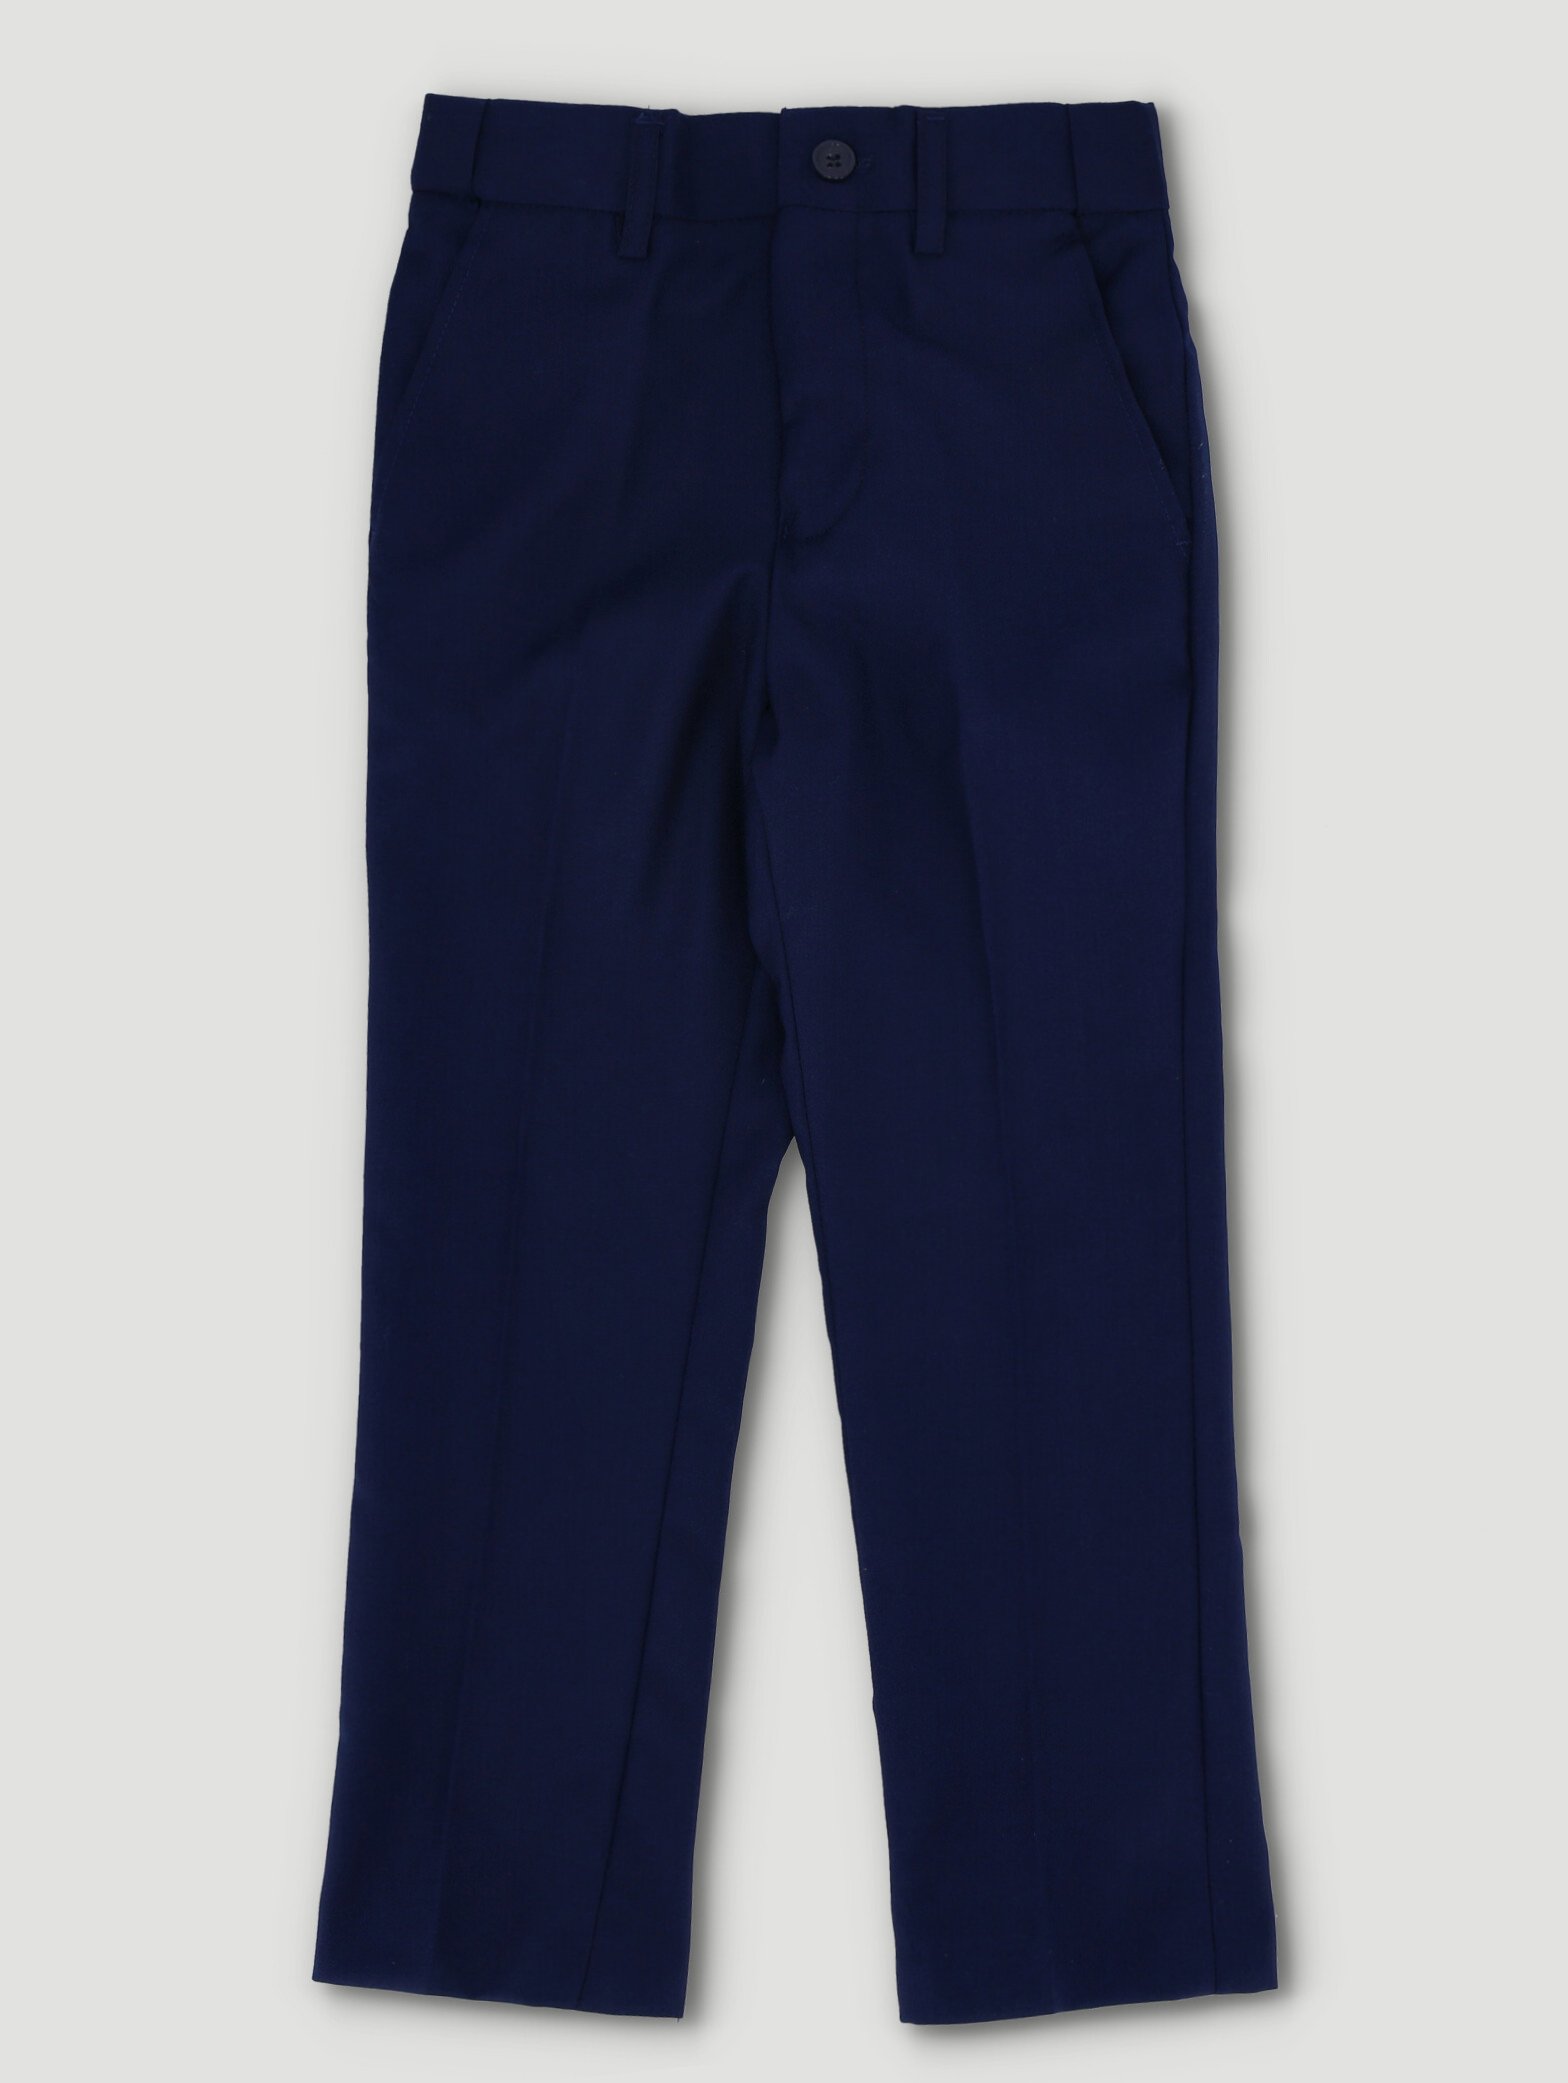 Clay Boy Cotton Mens Formal Trousers, Machine wash at Rs 250 in Kolkata